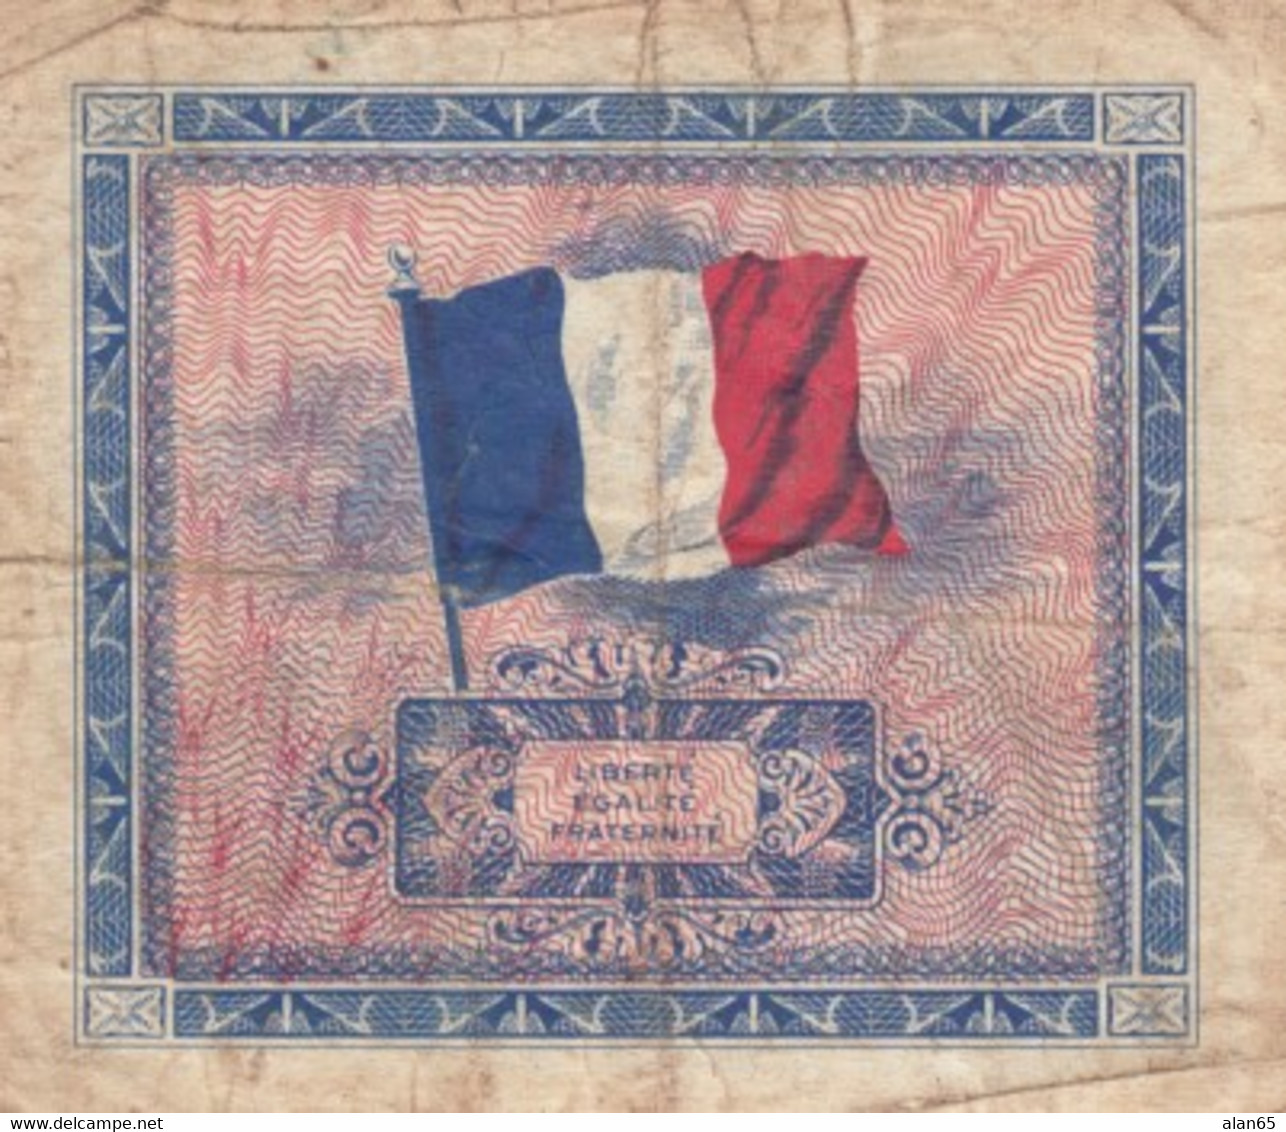 France #114a, 2 Francs 1944 Fine/Very Fine Banknote - 1944 Flagge/Frankreich